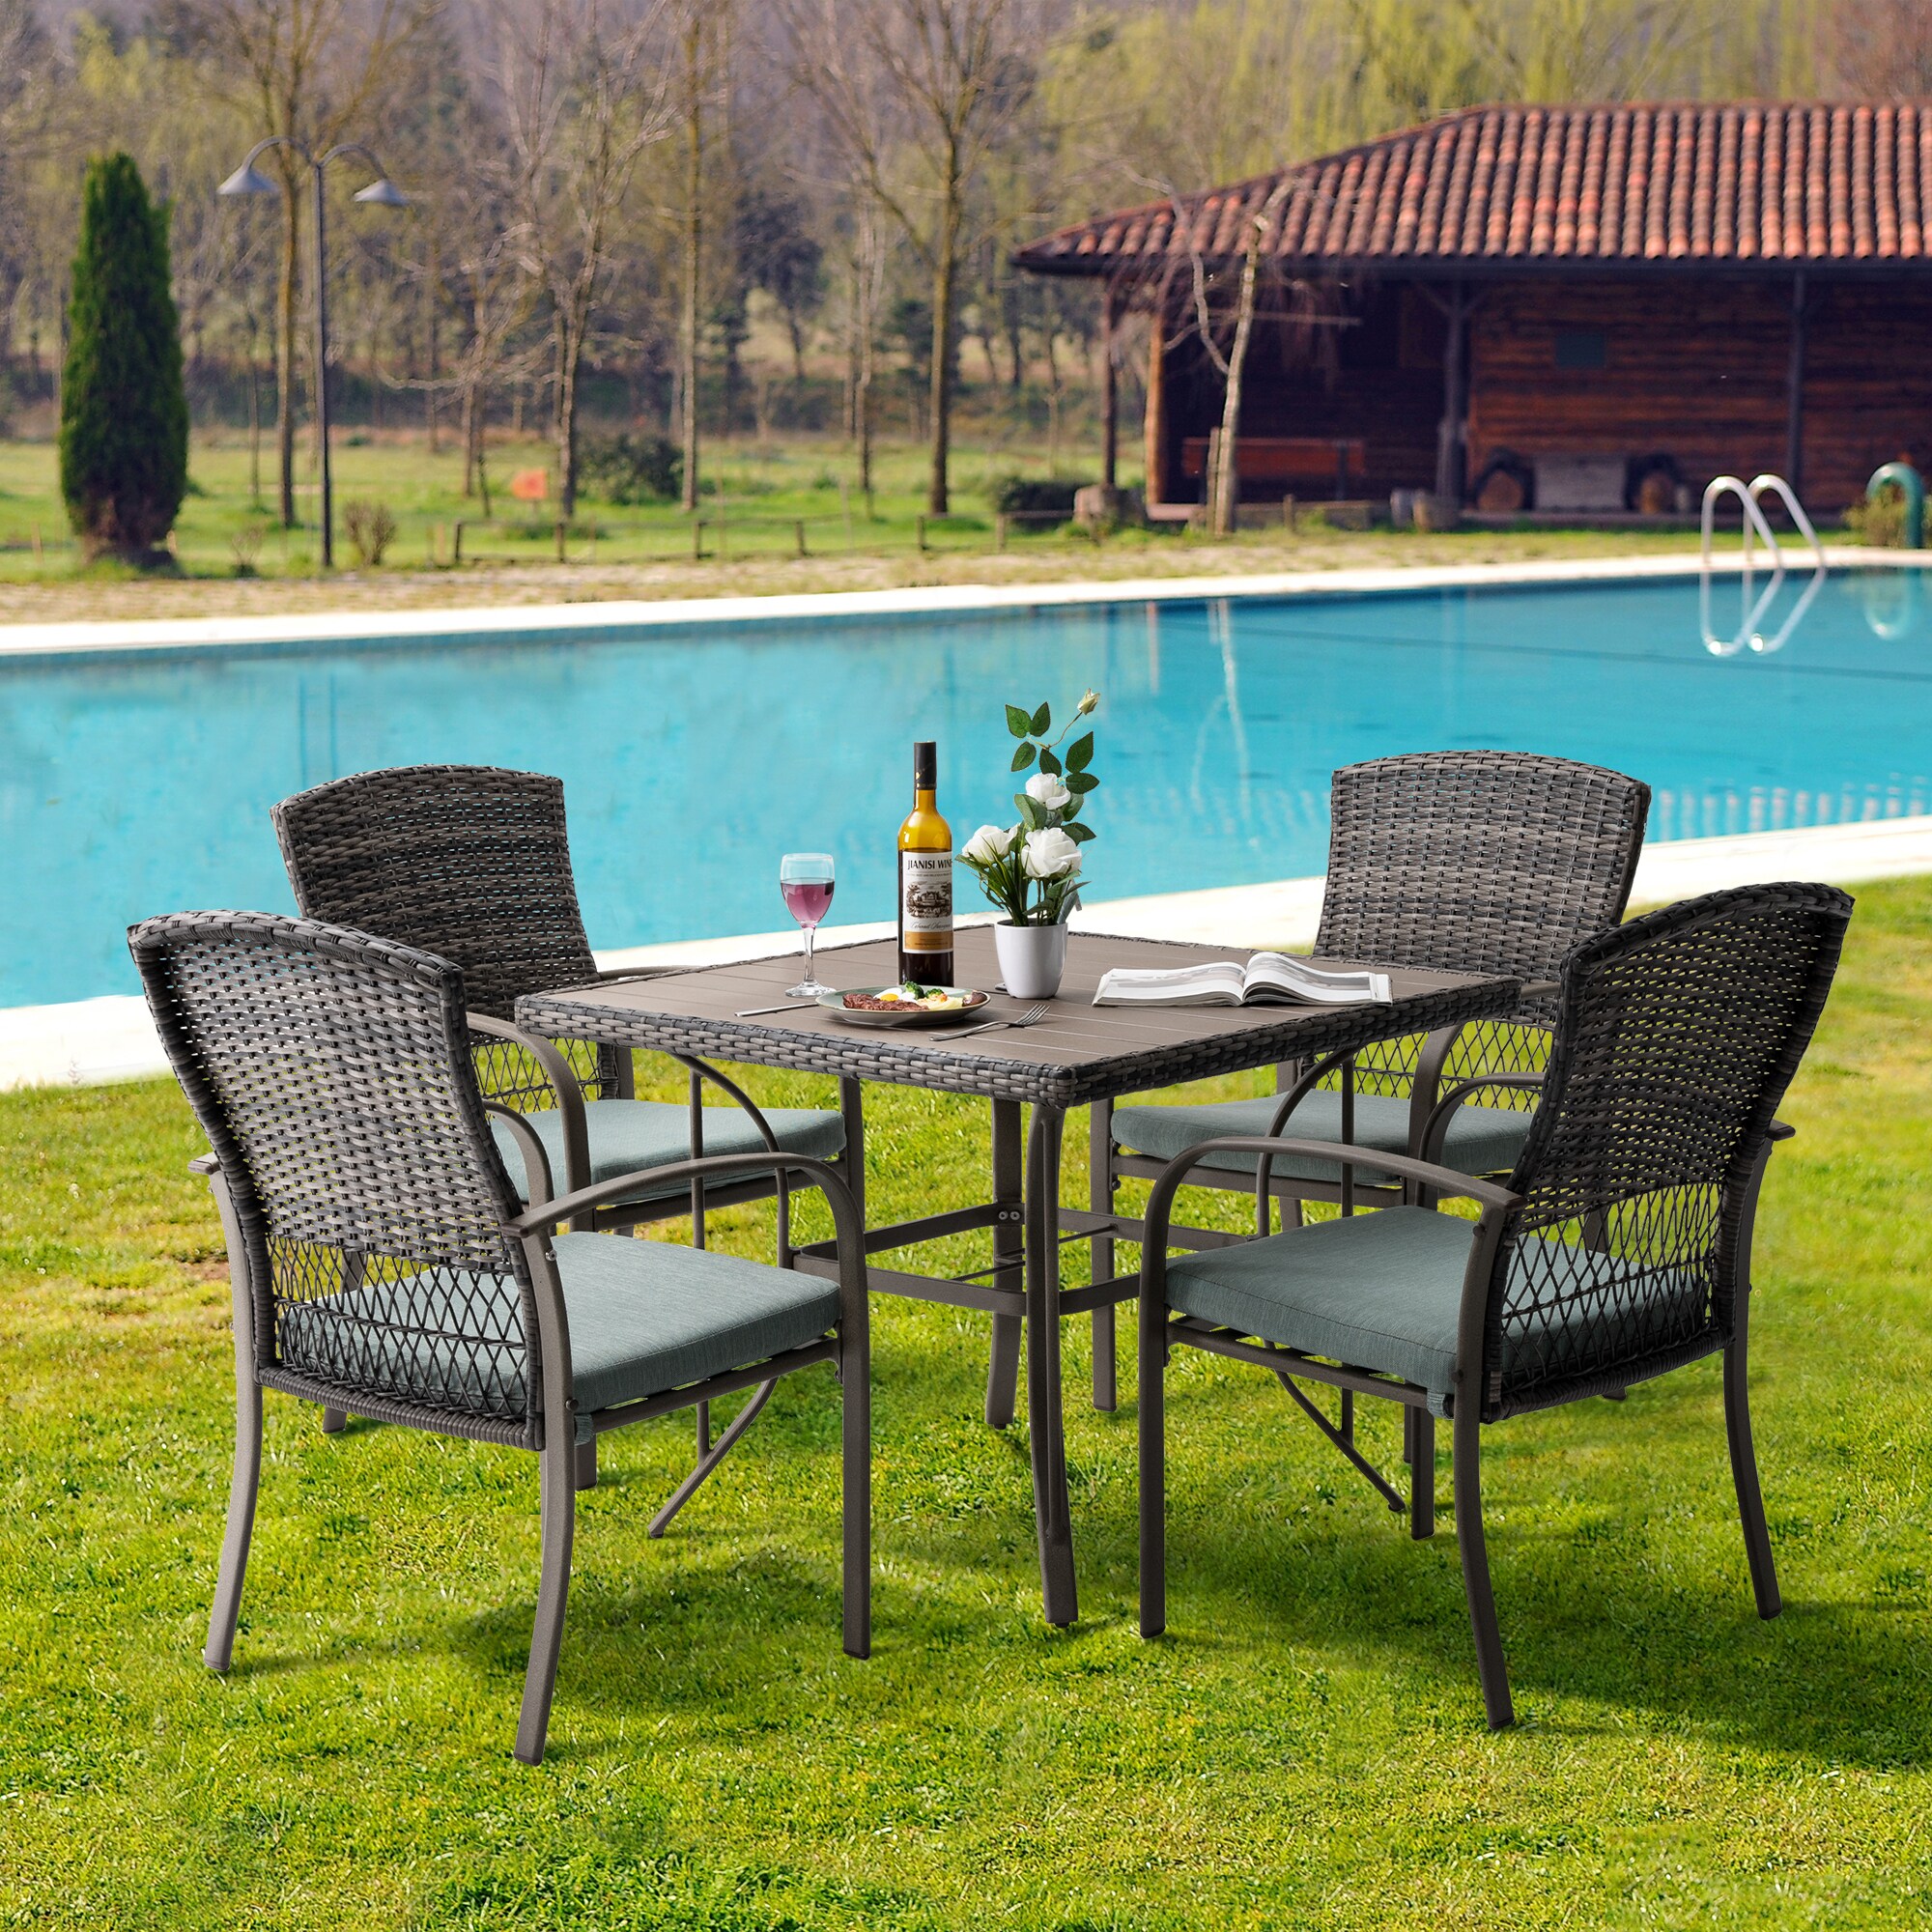 PamaPic 5-Pieces Wicker Patio Furniture Set Outdoor Patio Chairs